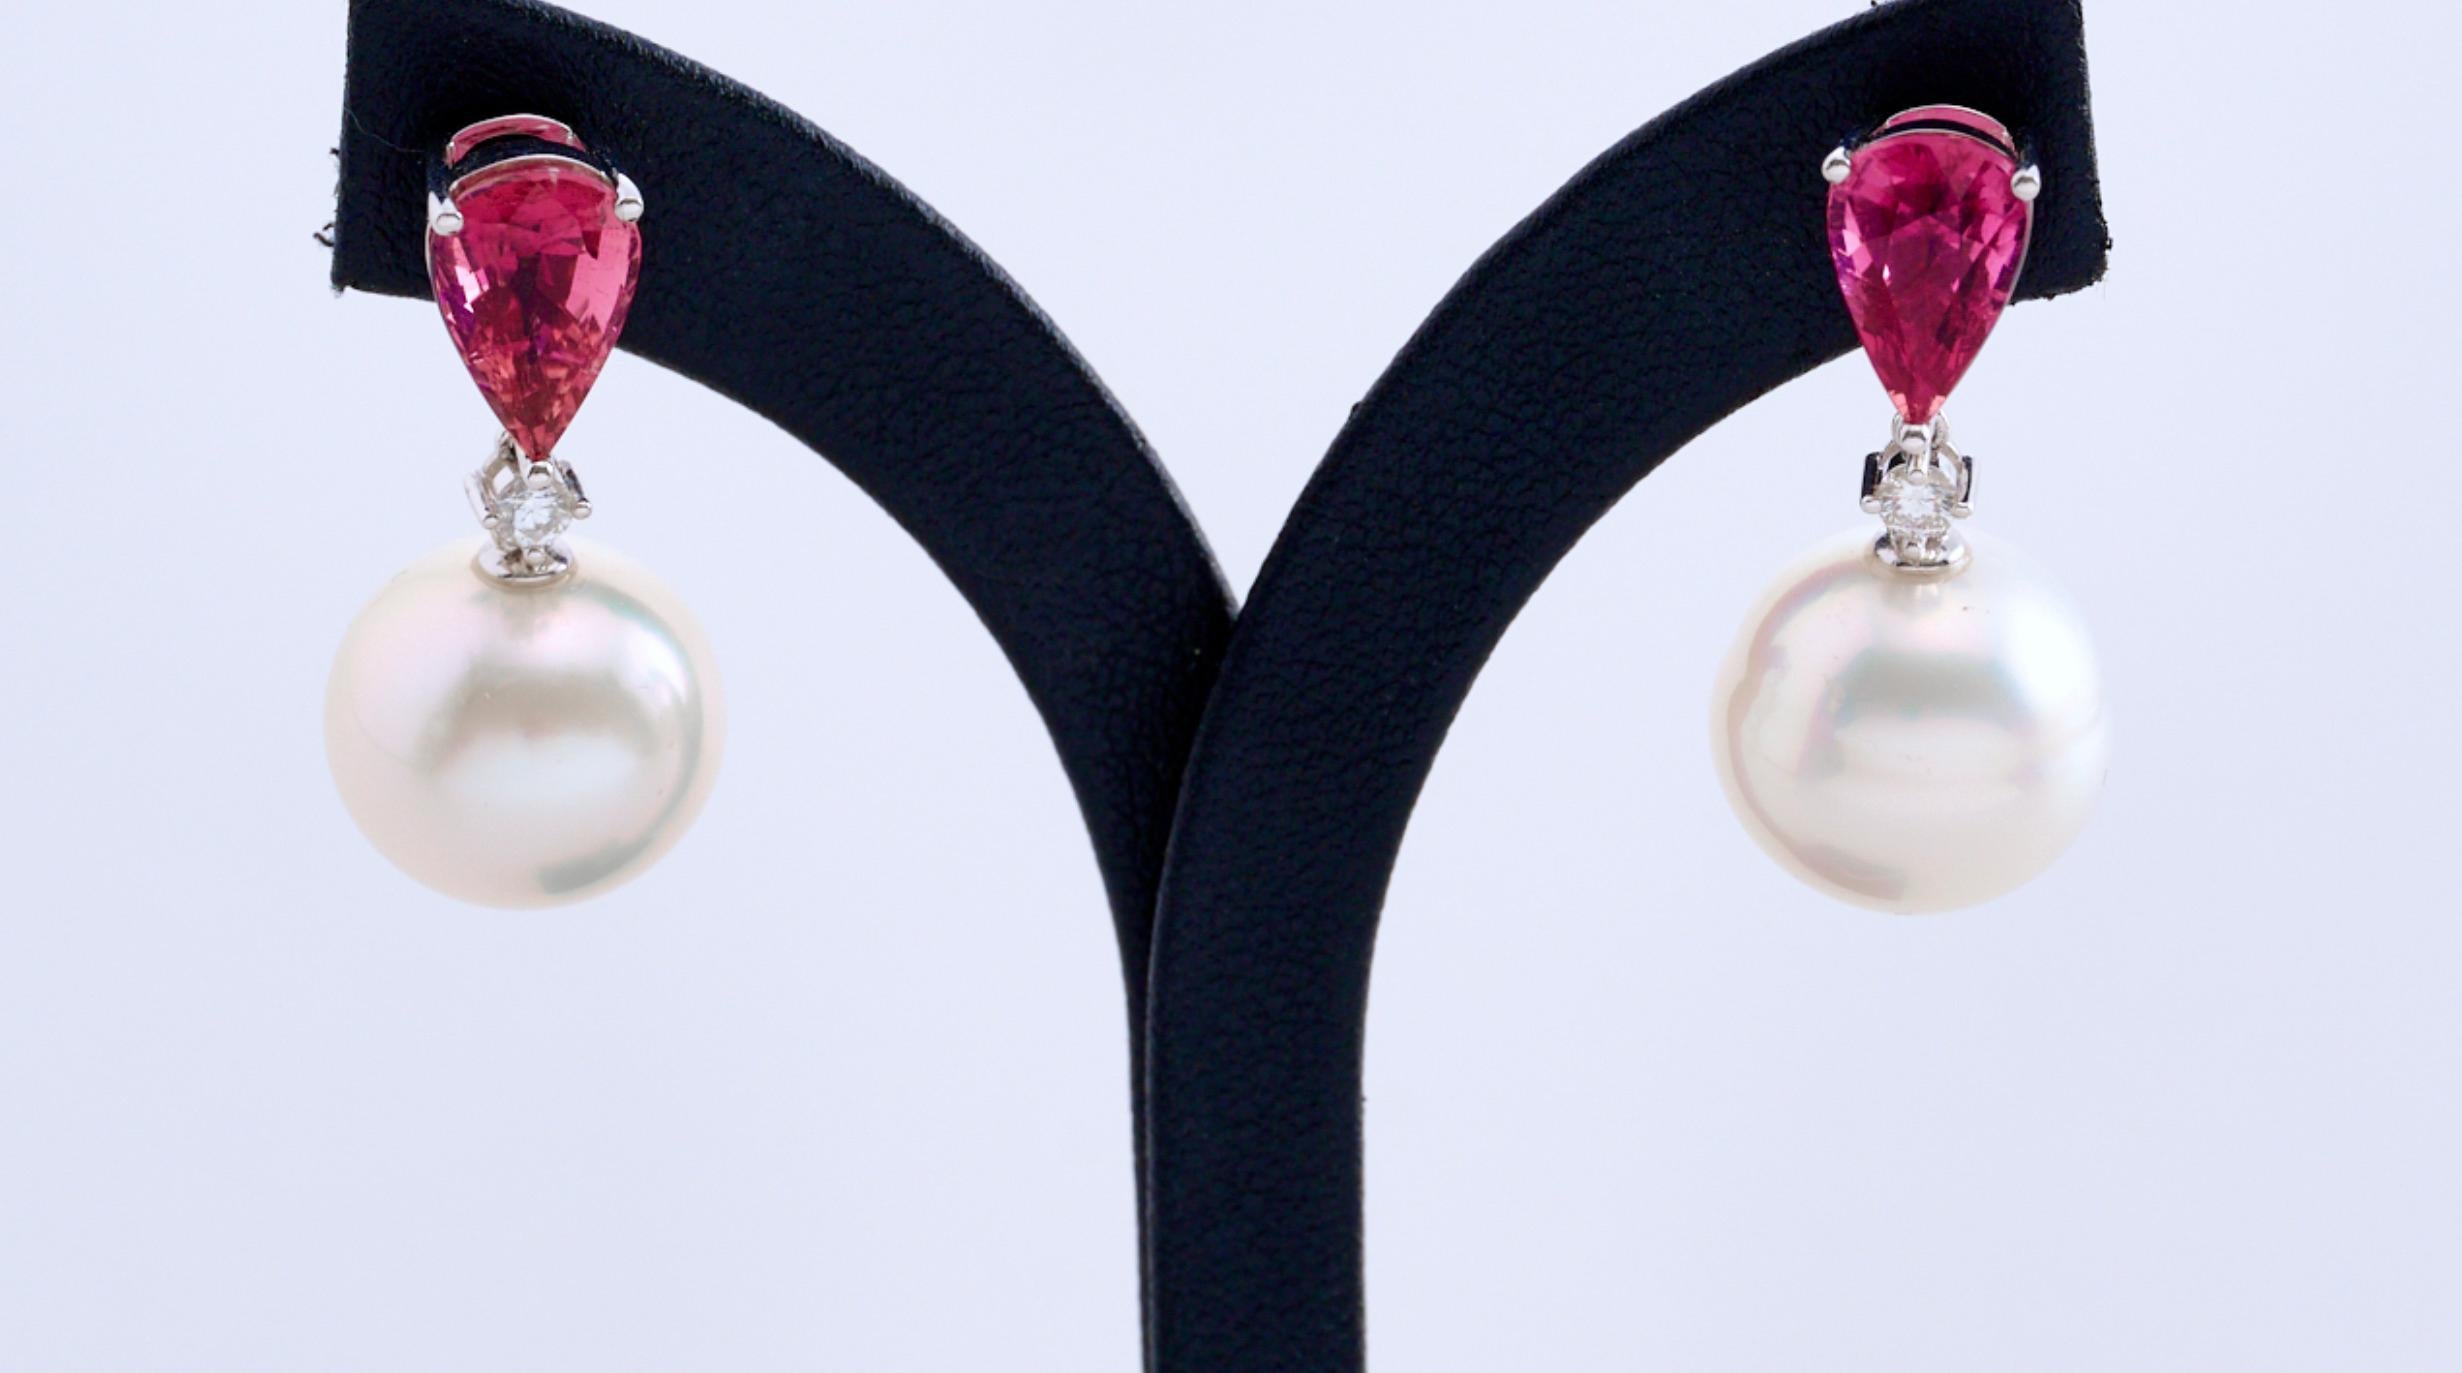 A pair of Rubellite, White South Sea Pearls and Diamond Earring in 18K White Gold. This is our signature Pearl Earring design, Main Stone suspended by a single Pearl. on top of that the round Brilliant cut Diamond in the middle adds more fire and